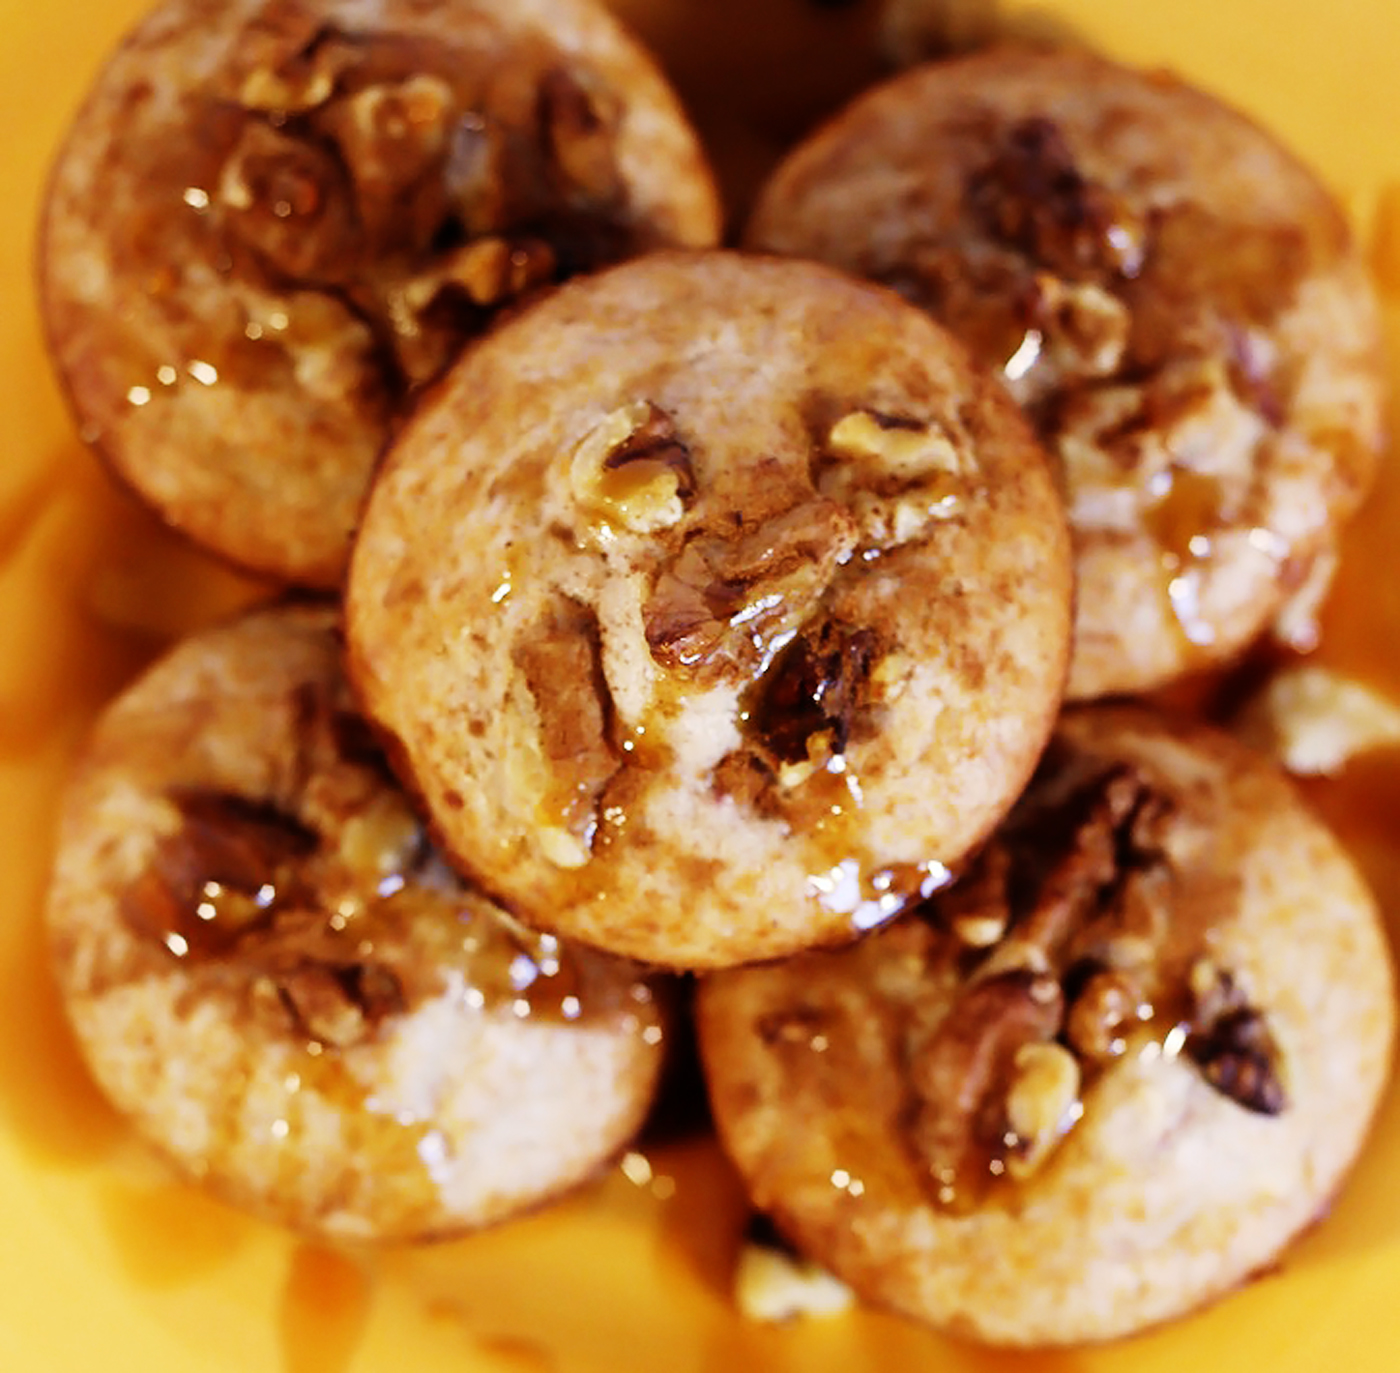 apple-cider-muffins-with-walnuts-and-caramel-sauce-drizzle4